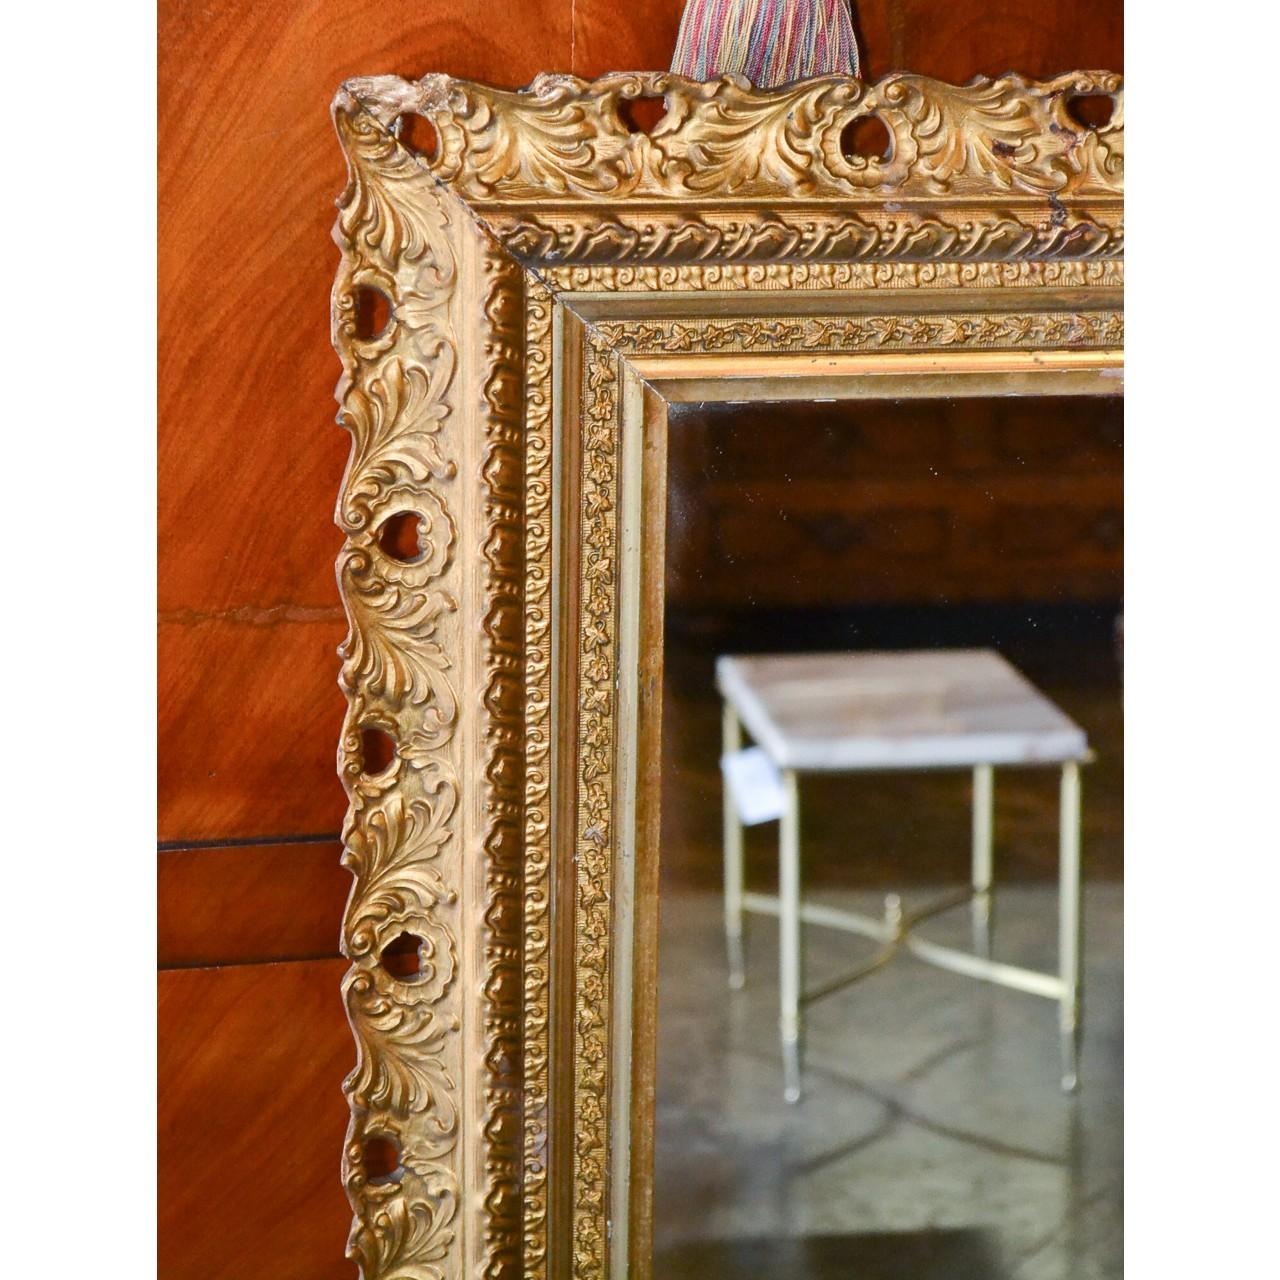 Charming antique English carved giltwood wall or console mirror. The outer border carved in relief with scrolling acanthus leaves. The inner border carved in a laurel leaf motif,

circa 1900.